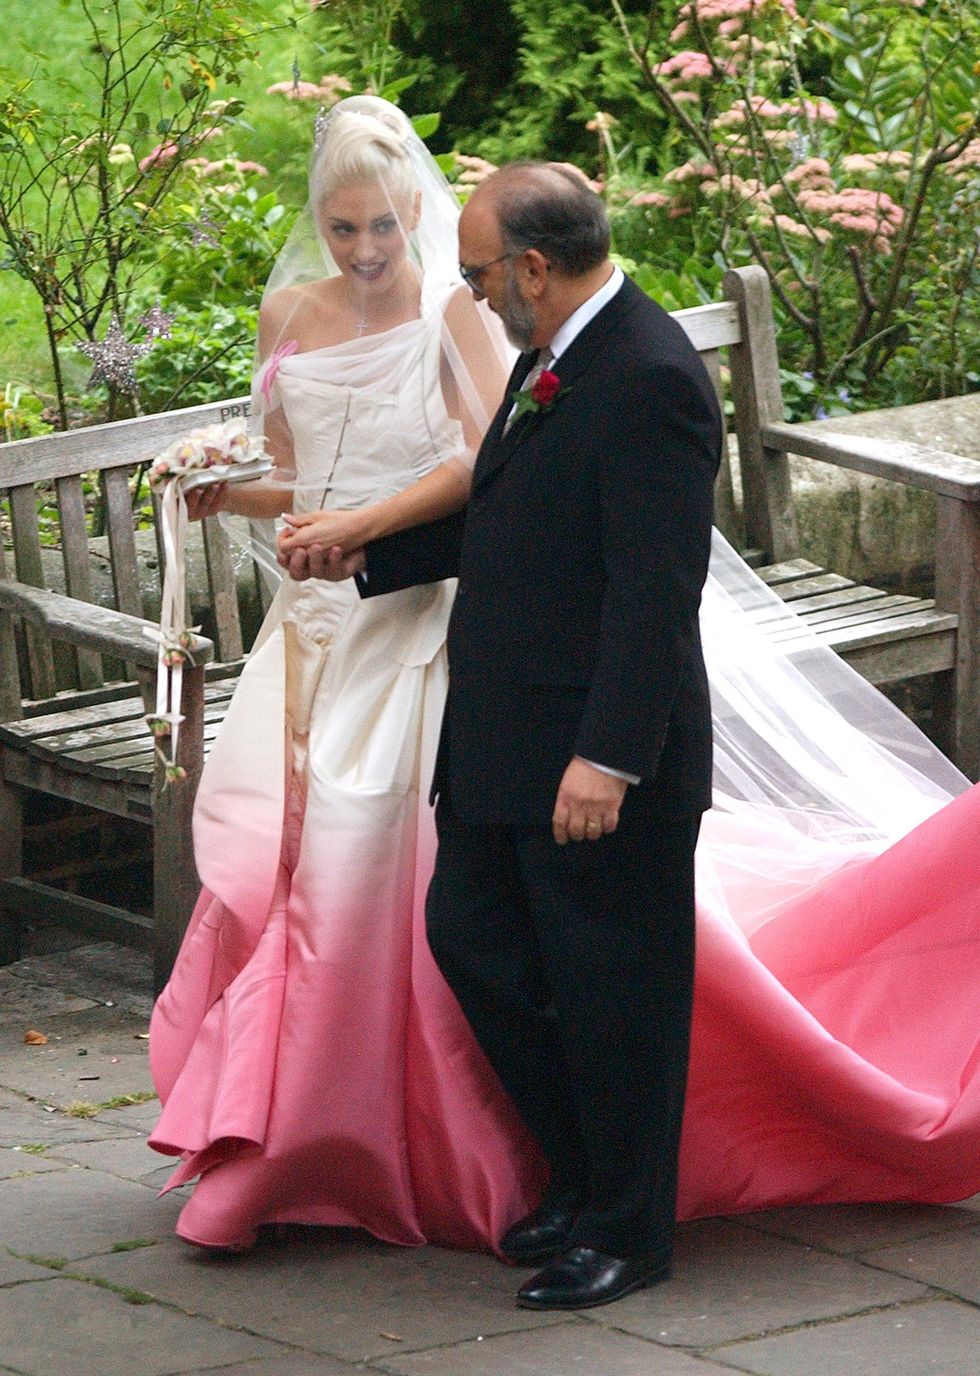 Photograph, Pink, Gown, Dress, Wedding dress, Formal wear, Bridal clothing, Ceremony, Bride, Event, 